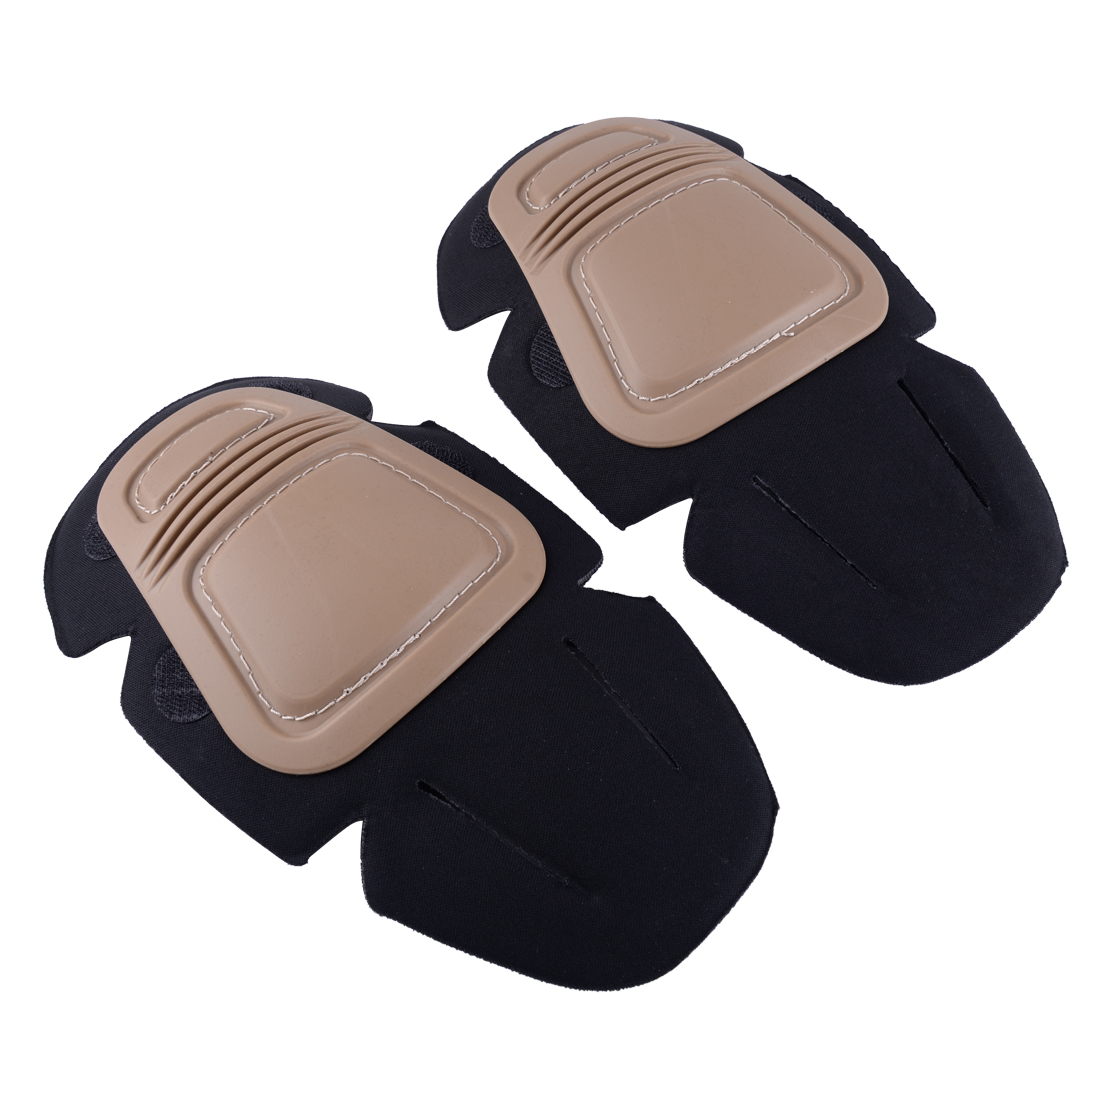 Tactical EVA Protective Knee Pads Black for Military Army G3 Gen3 Pants Trousers 